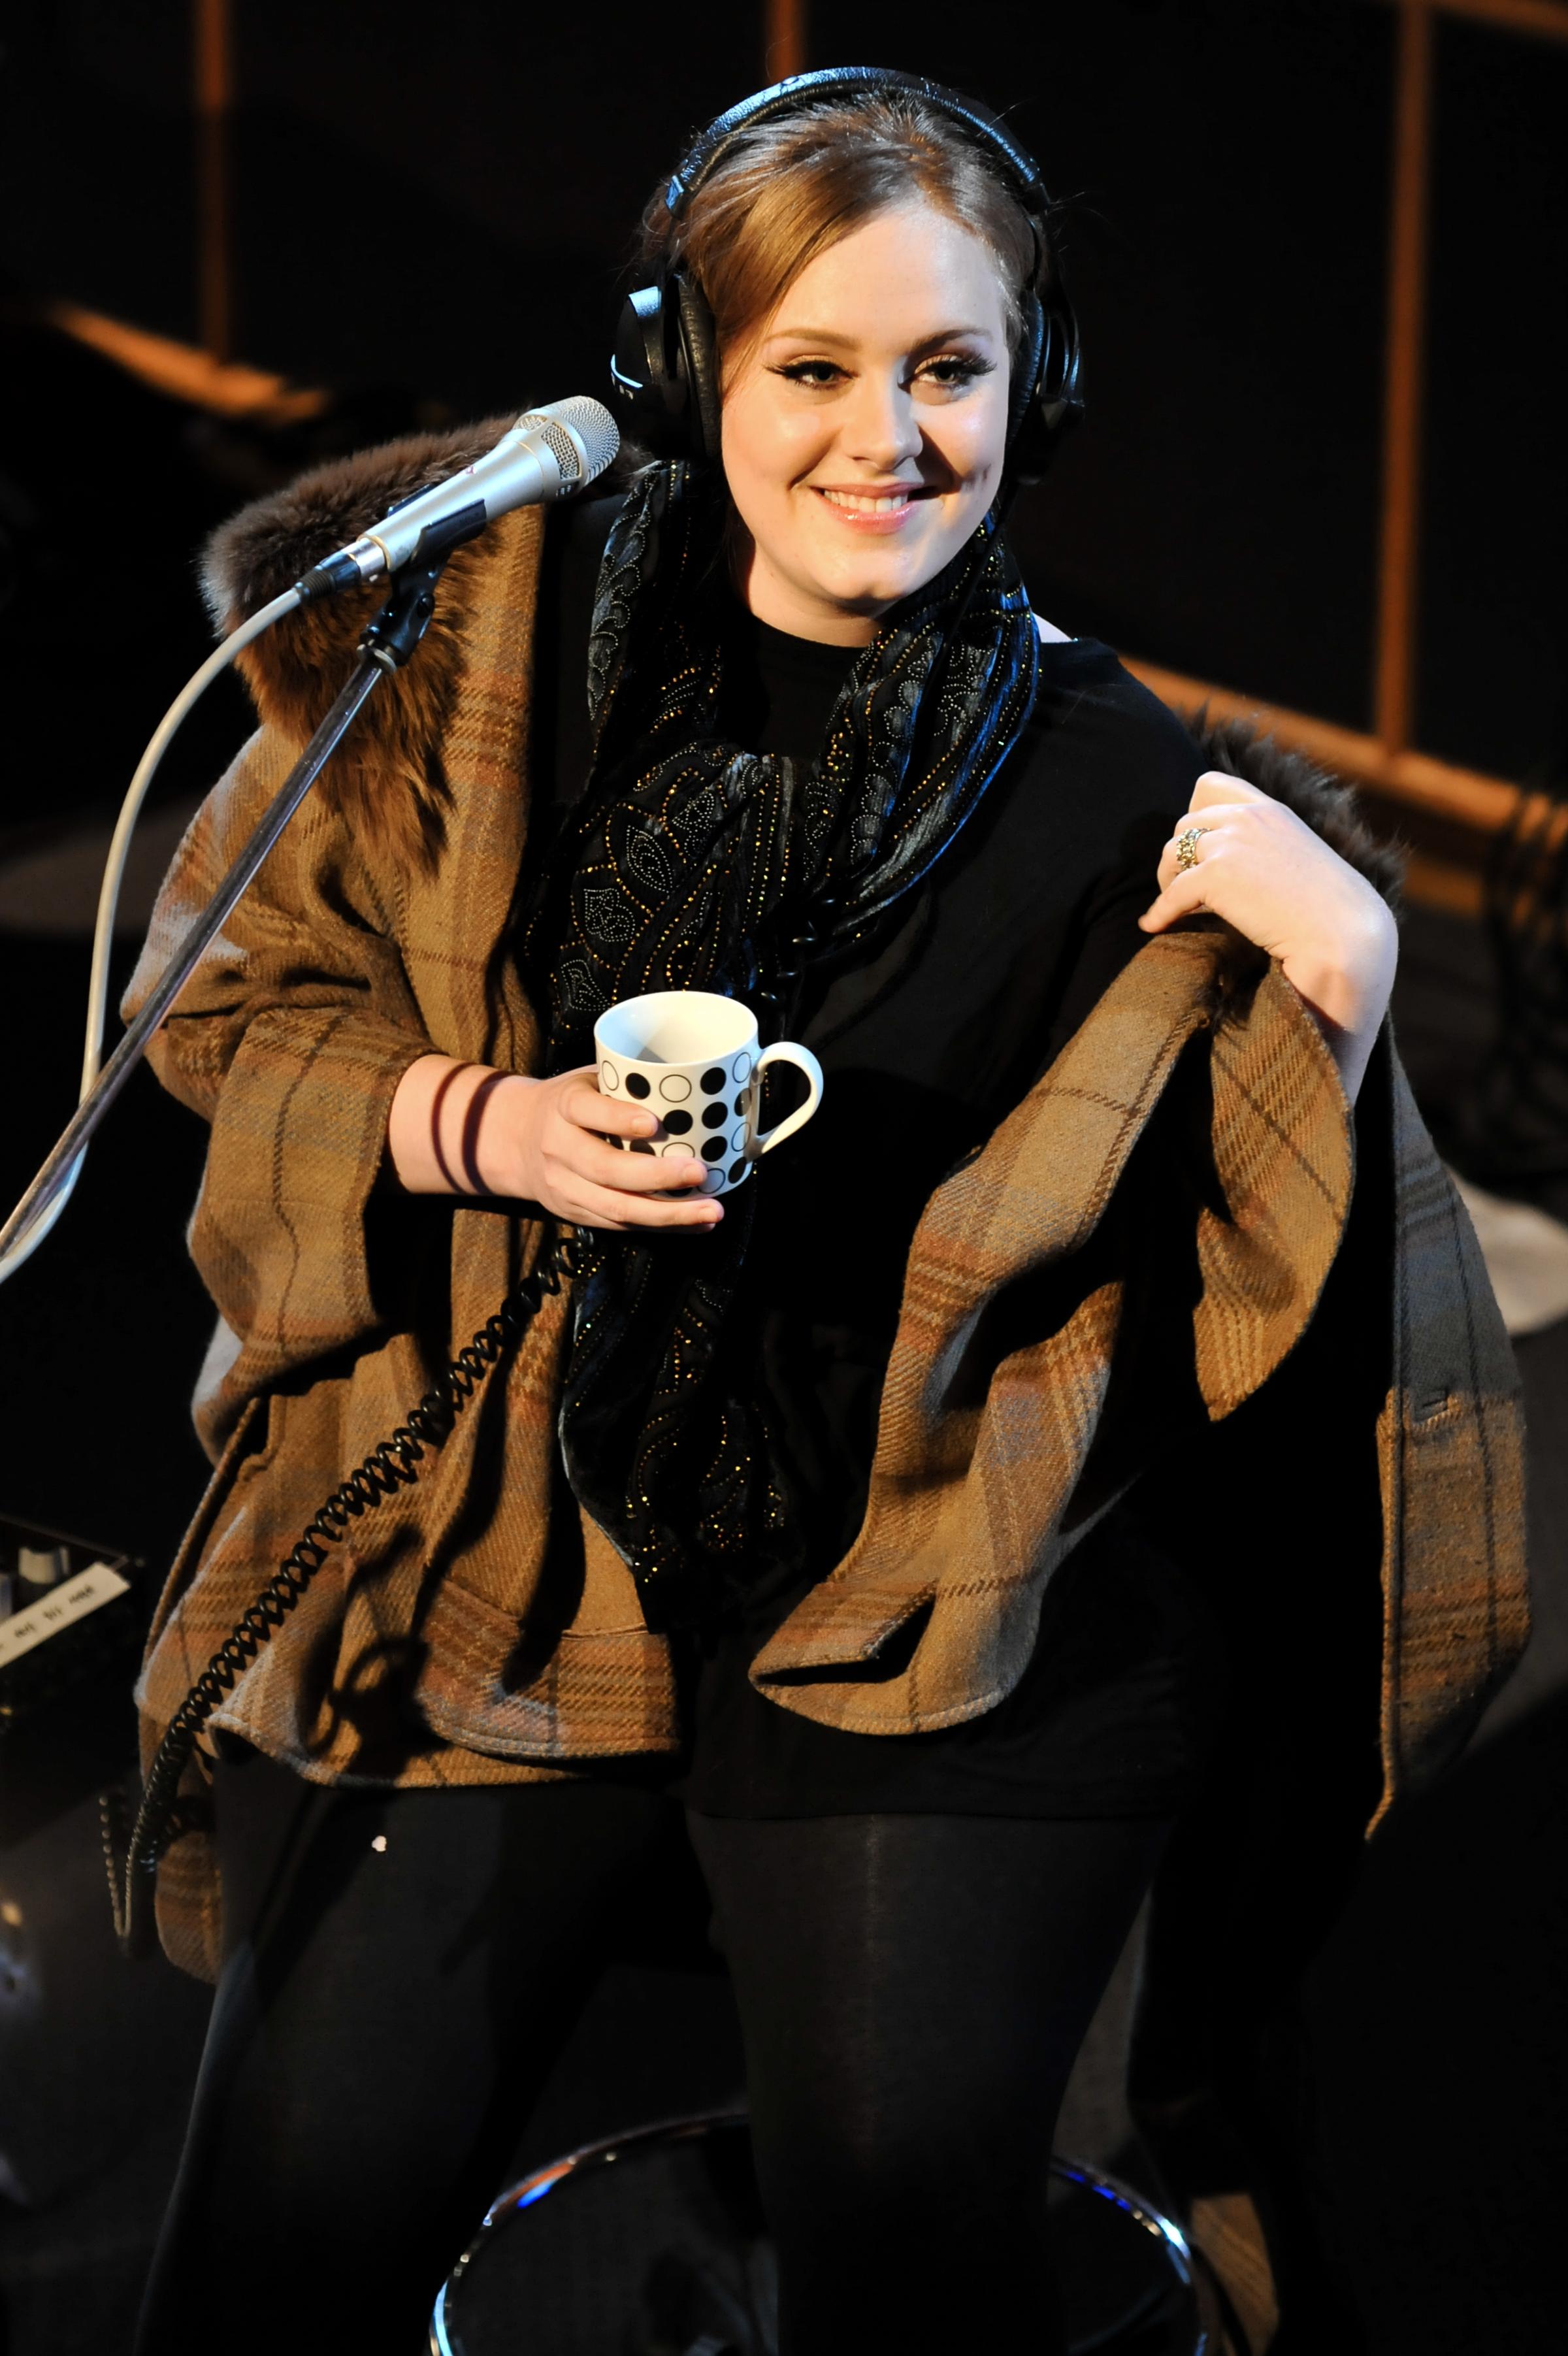 LONDON, ENGLAND - JANUARY 27: Adele performs a Live Lounge Special for BBC Radio 1 at BBC Maida Vale Studios on January 27, 2011 in London, England. (Photo by Andy Sheppard/Redferns)